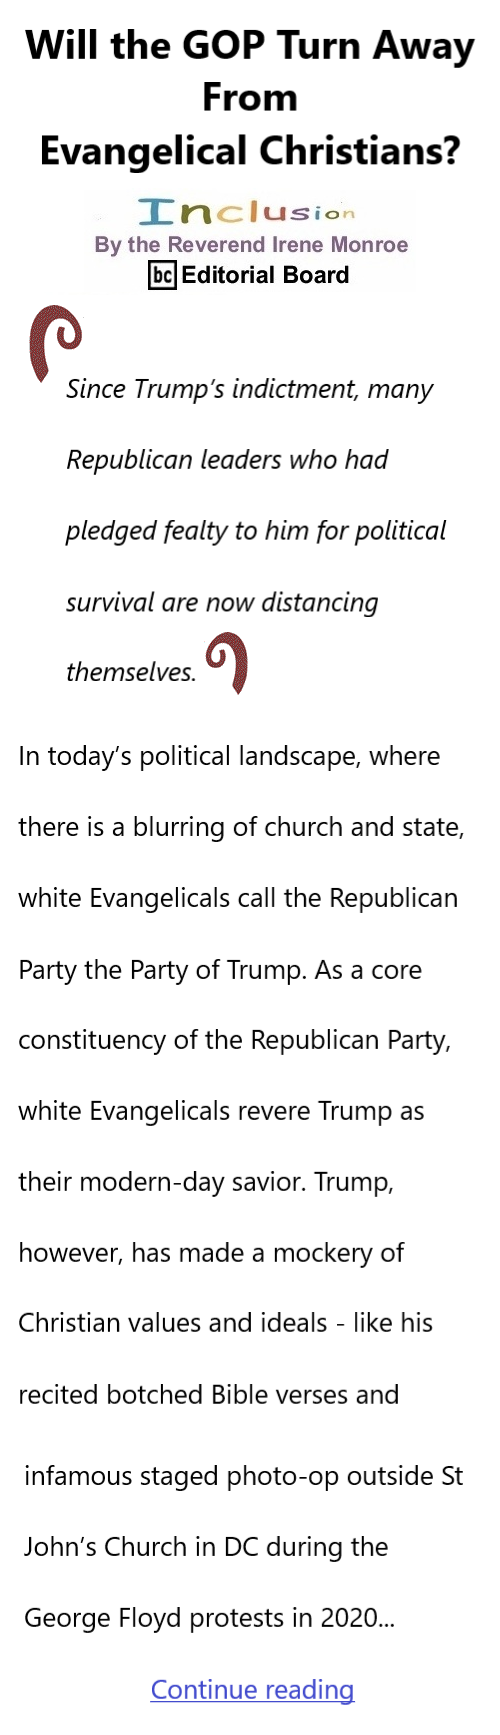 BlackCommentator.com July 6, 2023 - Issue 963: Will the GOP Turn Away From Evangelical Christians? - Inclusion By The Reverend Irene Monroe, BC Editorial Board